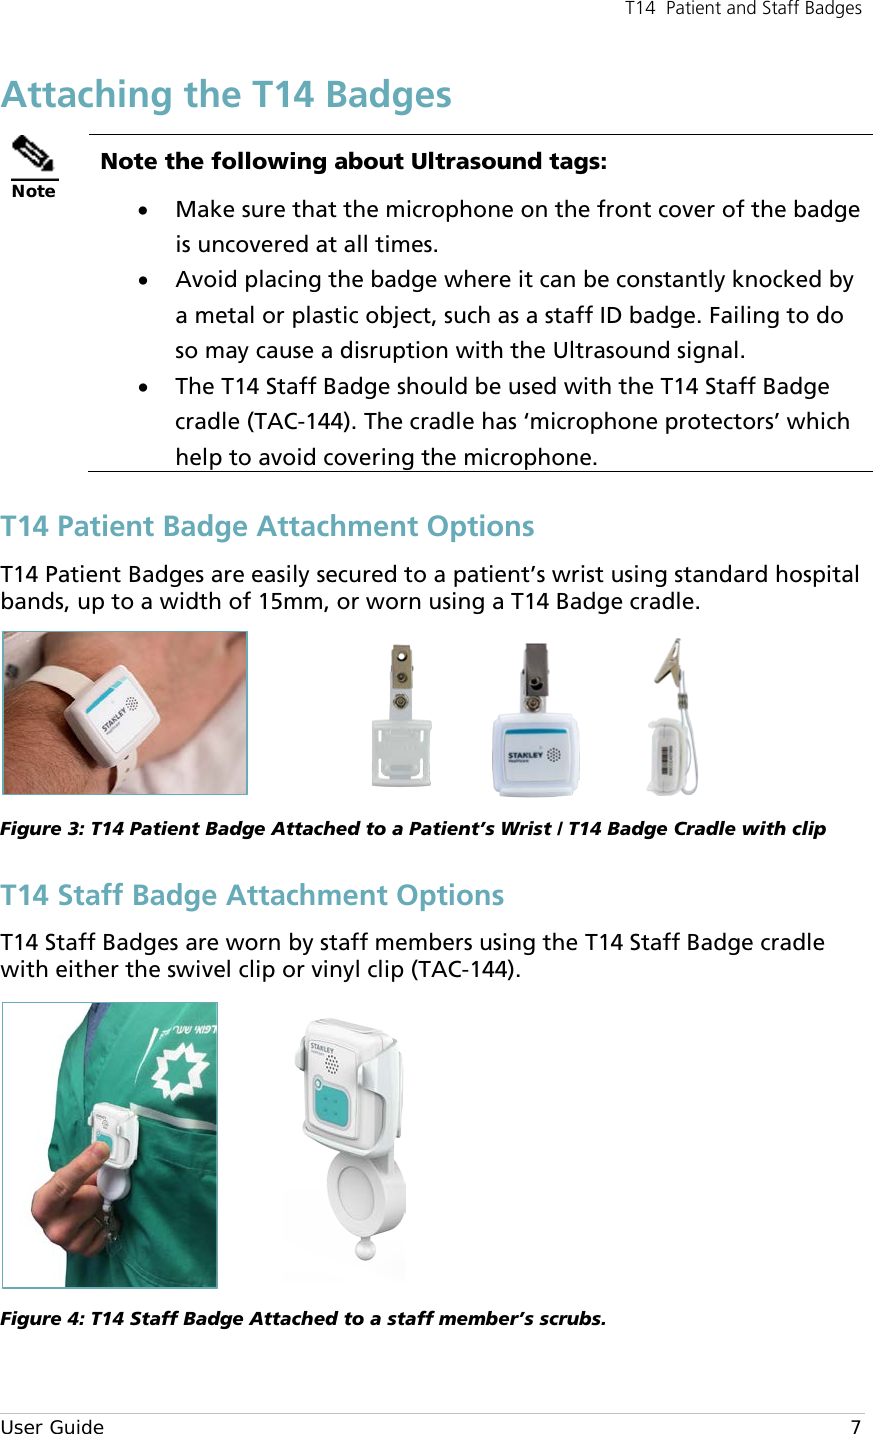 T14  Patient and Staff Badges  User Guide     7 Attaching the T14 Badges  Note Note the following about Ultrasound tags: • Make sure that the microphone on the front cover of the badge is uncovered at all times. • Avoid placing the badge where it can be constantly knocked by a metal or plastic object, such as a staff ID badge. Failing to do so may cause a disruption with the Ultrasound signal. • The T14 Staff Badge should be used with the T14 Staff Badge cradle (TAC-144). The cradle has ‘microphone protectors’ which help to avoid covering the microphone. T14 Patient Badge Attachment Options T14 Patient Badges are easily secured to a patient’s wrist using standard hospital bands, up to a width of 15mm, or worn using a T14 Badge cradle.                   Figure 3: T14 Patient Badge Attached to a Patient’s Wrist / T14 Badge Cradle with clip T14 Staff Badge Attachment Options T14 Staff Badges are worn by staff members using the T14 Staff Badge cradle with either the swivel clip or vinyl clip (TAC-144).   Figure 4: T14 Staff Badge Attached to a staff member’s scrubs. 